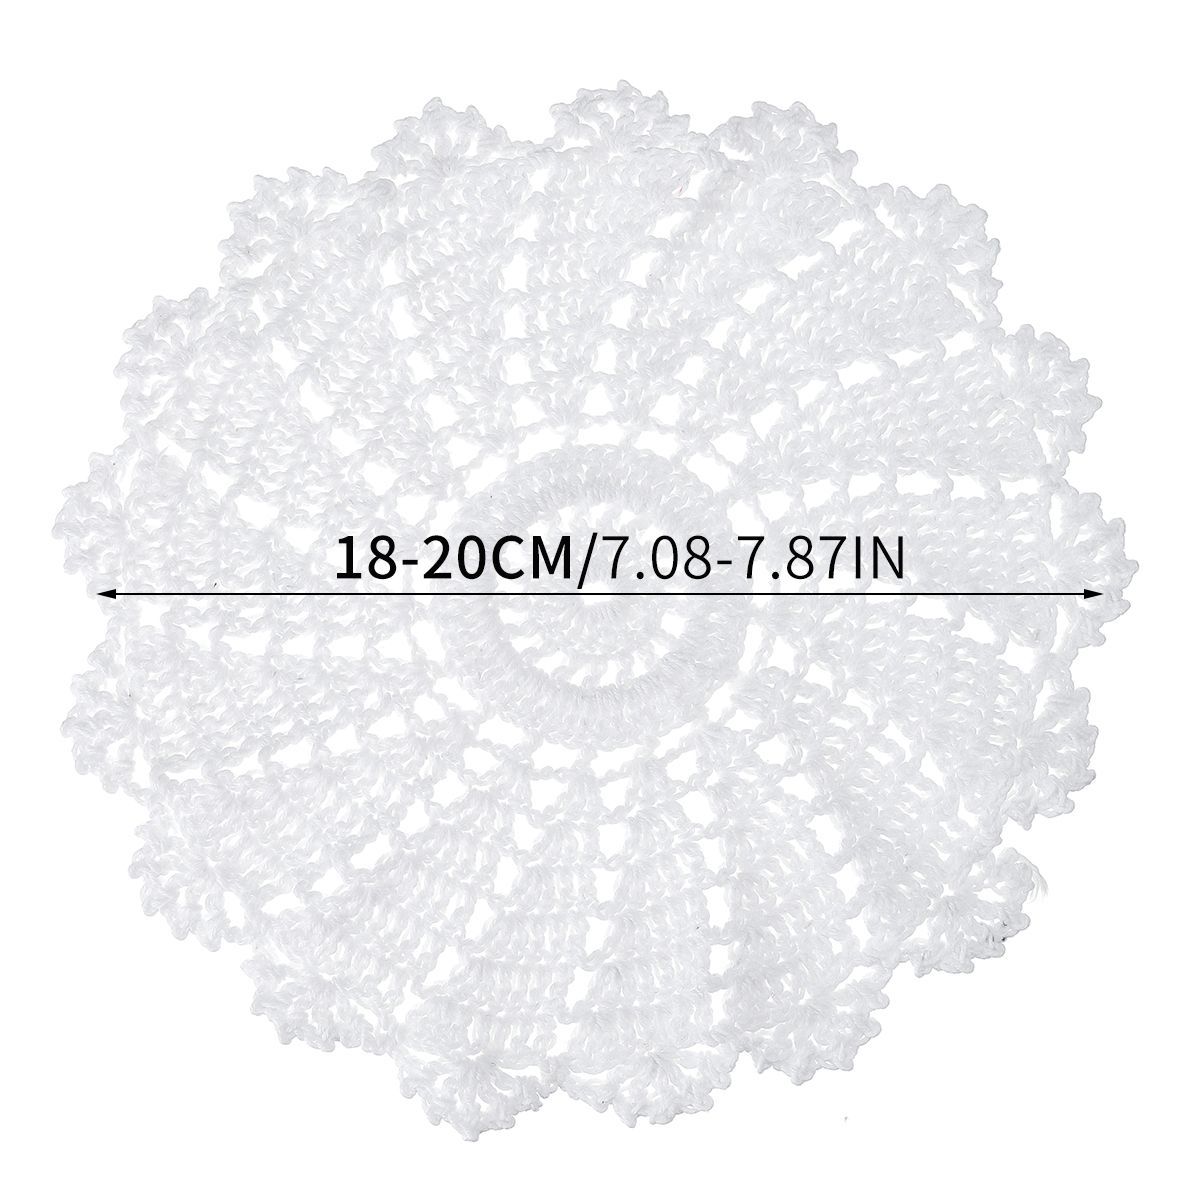 10PcsSet-Hand-Crocheted-Doilies-Cotton-Woven-Round-Cup-Dish-Table-Tablecloth-Placemat-Decorations-1532862